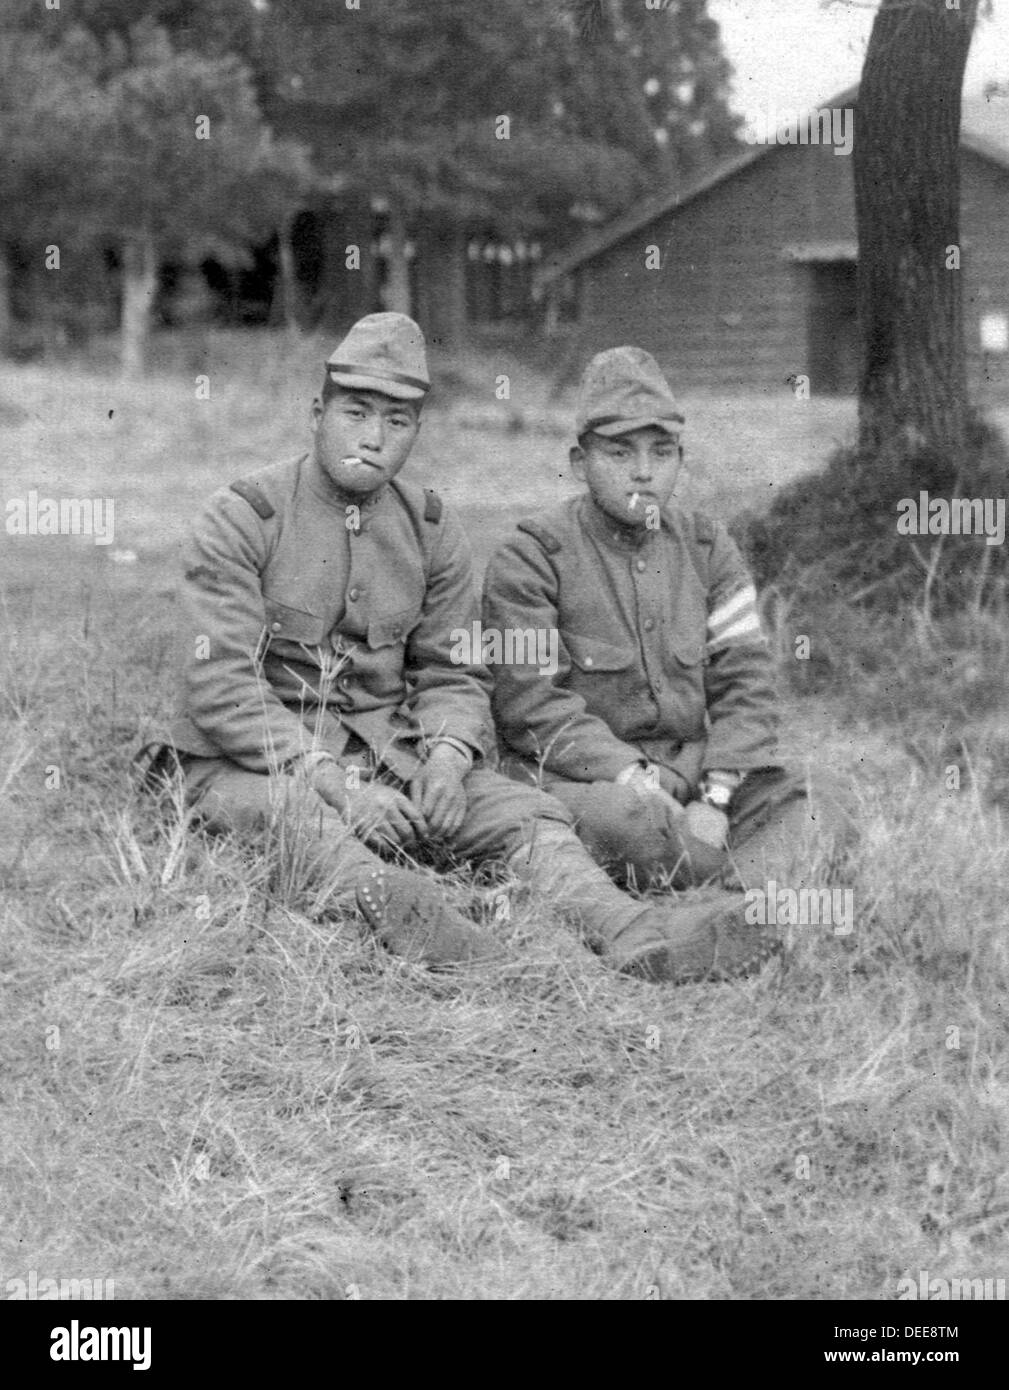 Japanese soldiers in uniform 1930s-1940s Stock Photo